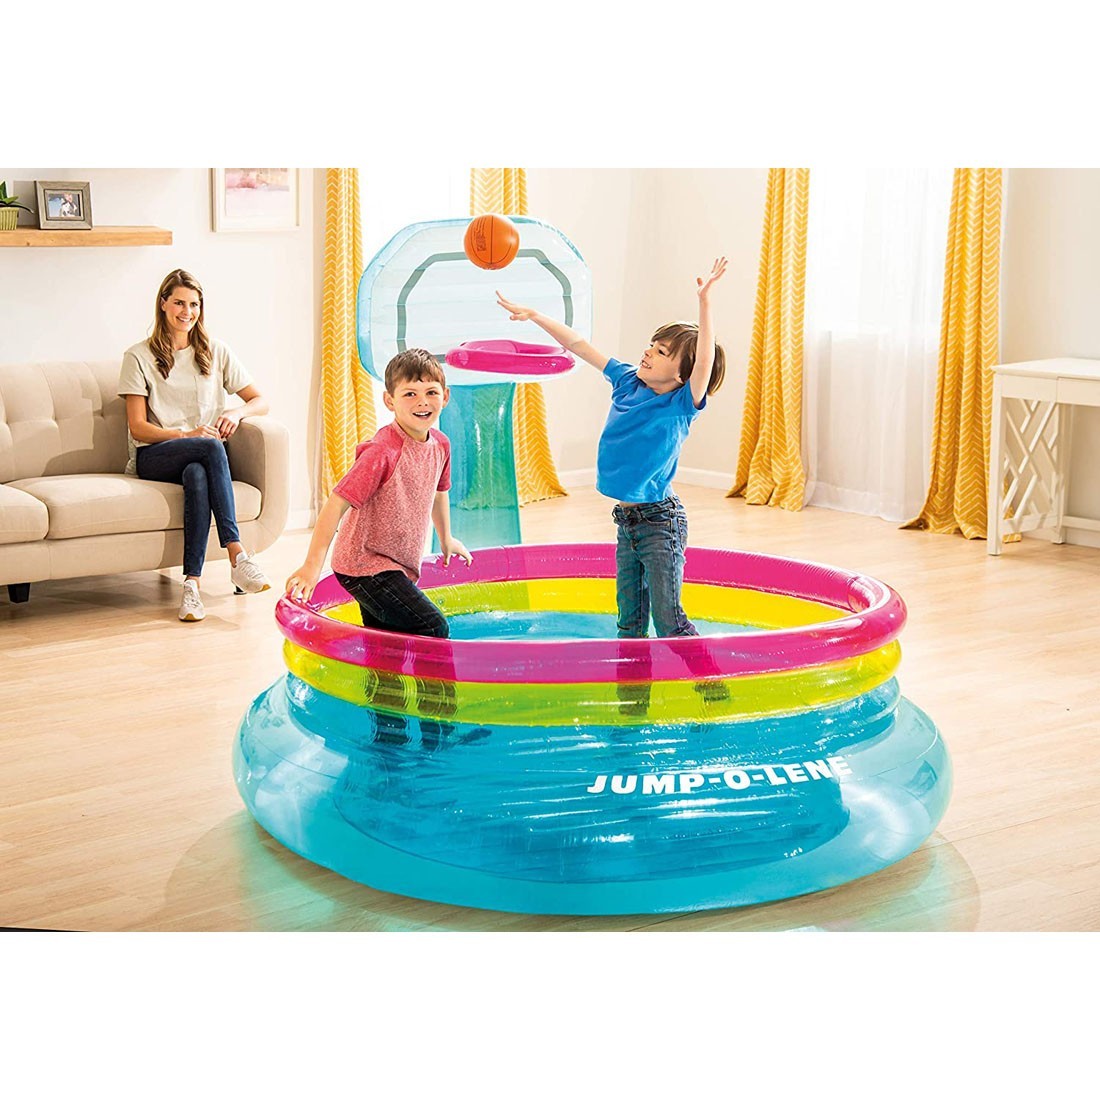 Shop Intex Shoot'N Bounce Jump-O-Lene - Intex, delivered to your home |  TheOutfit